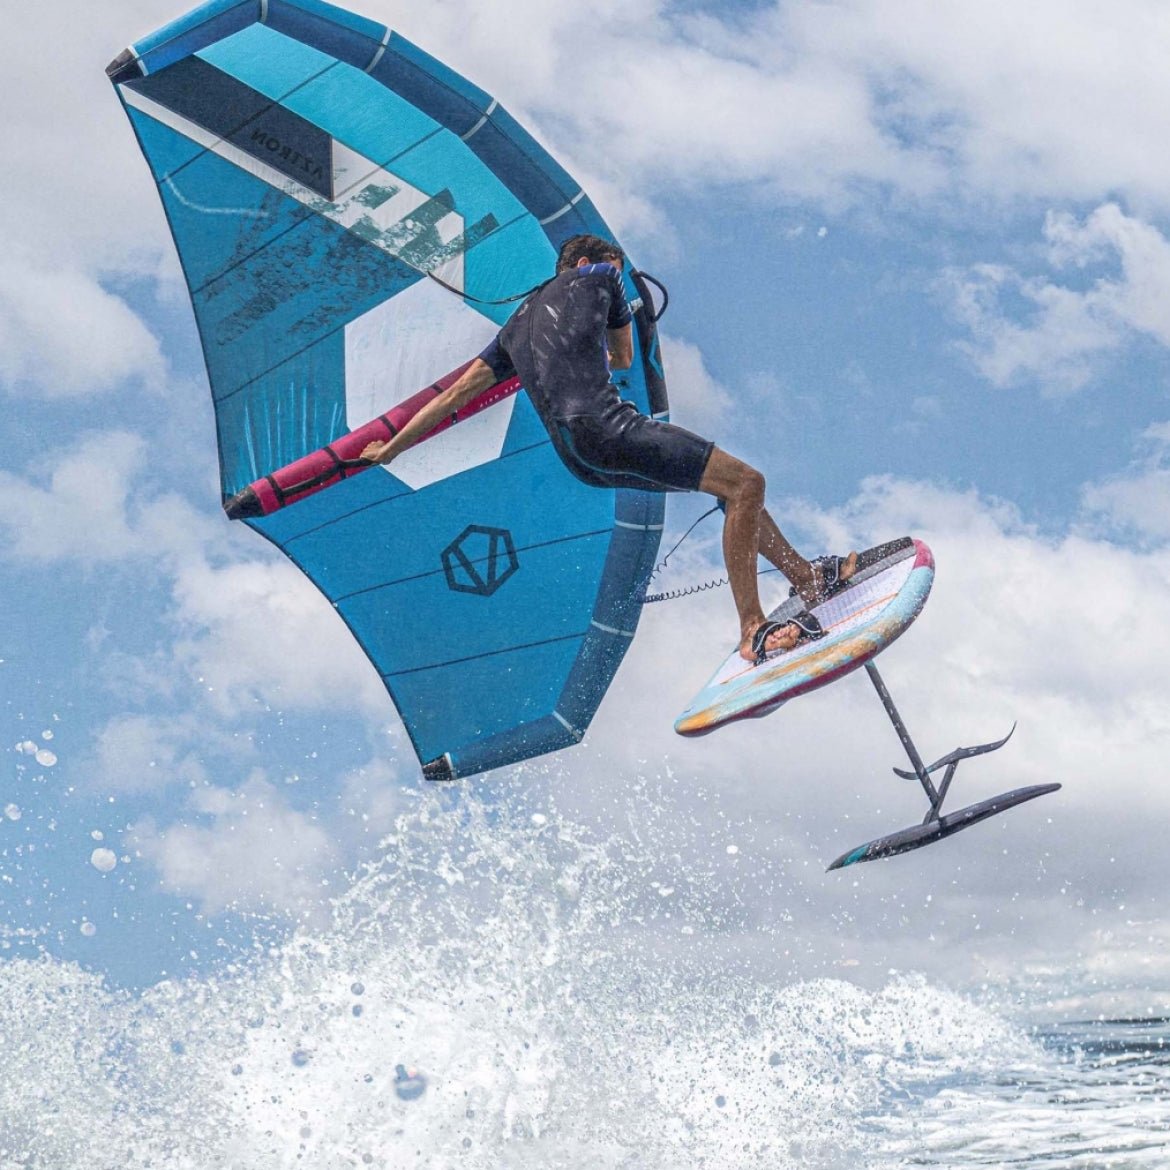 Aztron FALCON Carbon X 5'10 - Worthing Watersports - Wing Foil Boards - Aztron